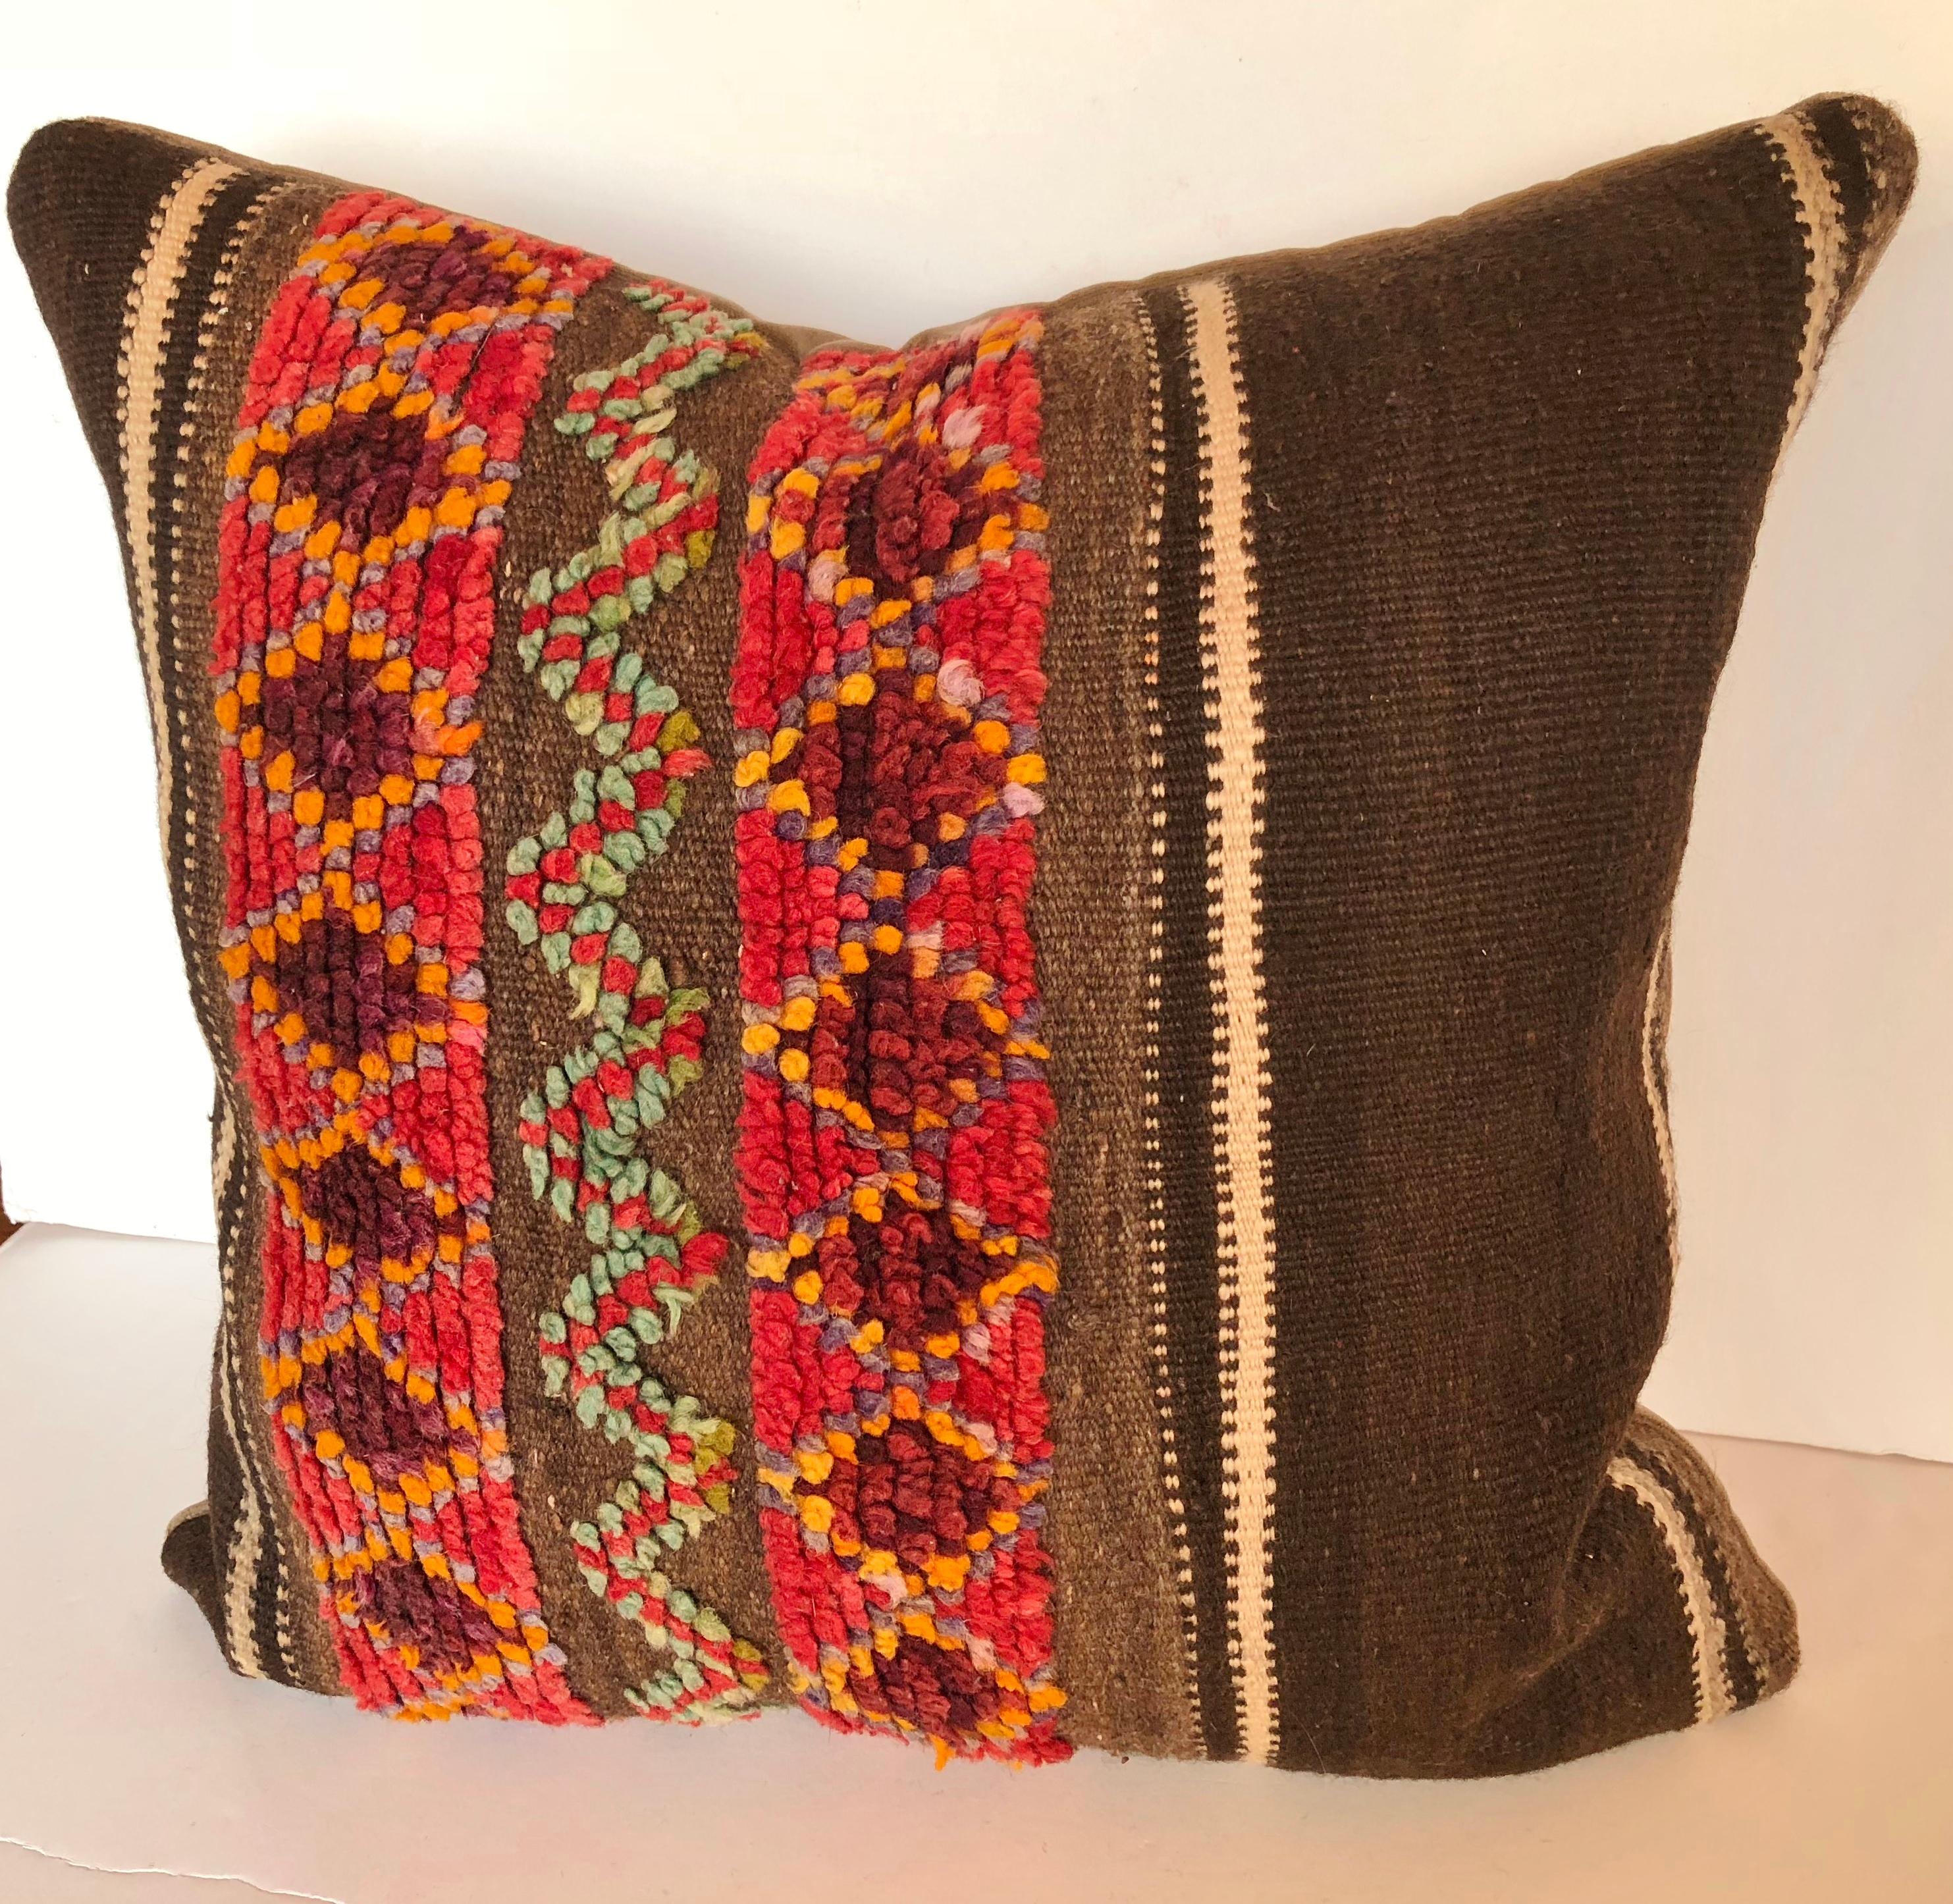 Custom pillow cut from a vintage hand loomed wool Moroccan Berber rug from the Atlas Mountains. Wool stripes are soft and lustrous with a colorful tufted tribal design. Pillow is backed in velvet, filled with an insert of 50/50 down and feathers and